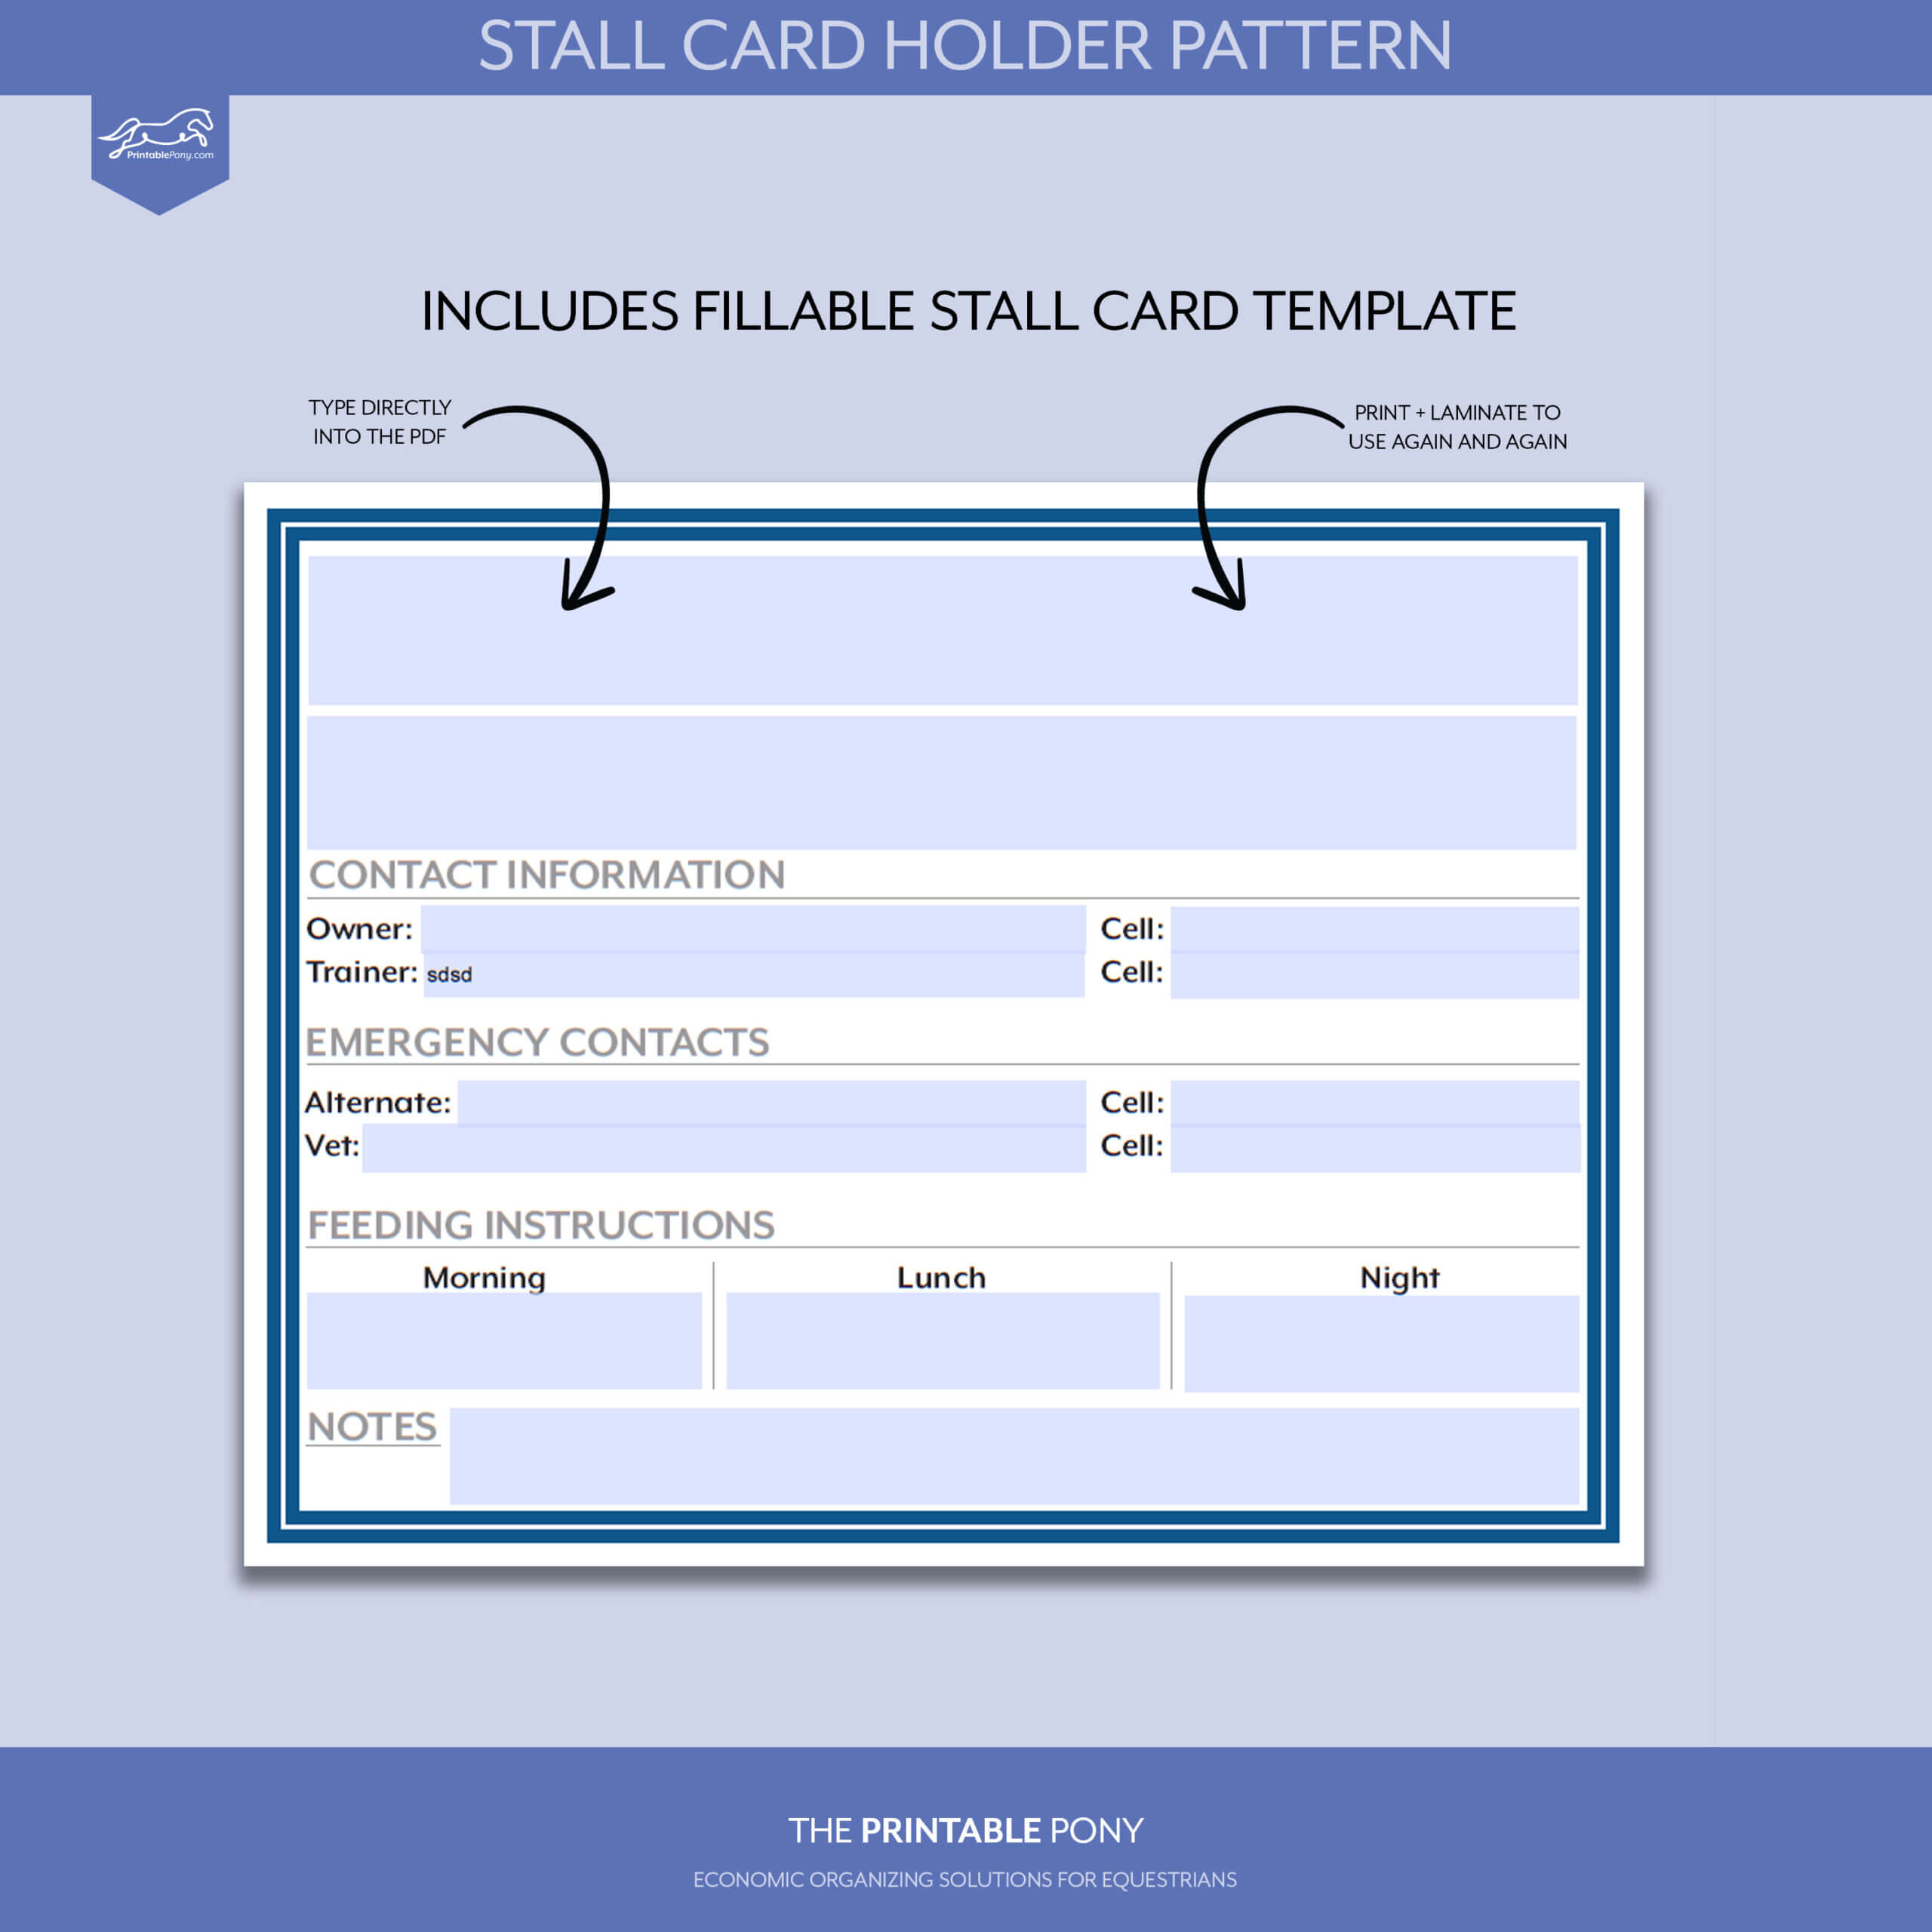 Stall Card Holder Pattern + Printable Stall Card Pertaining To Horse Stall Card Template